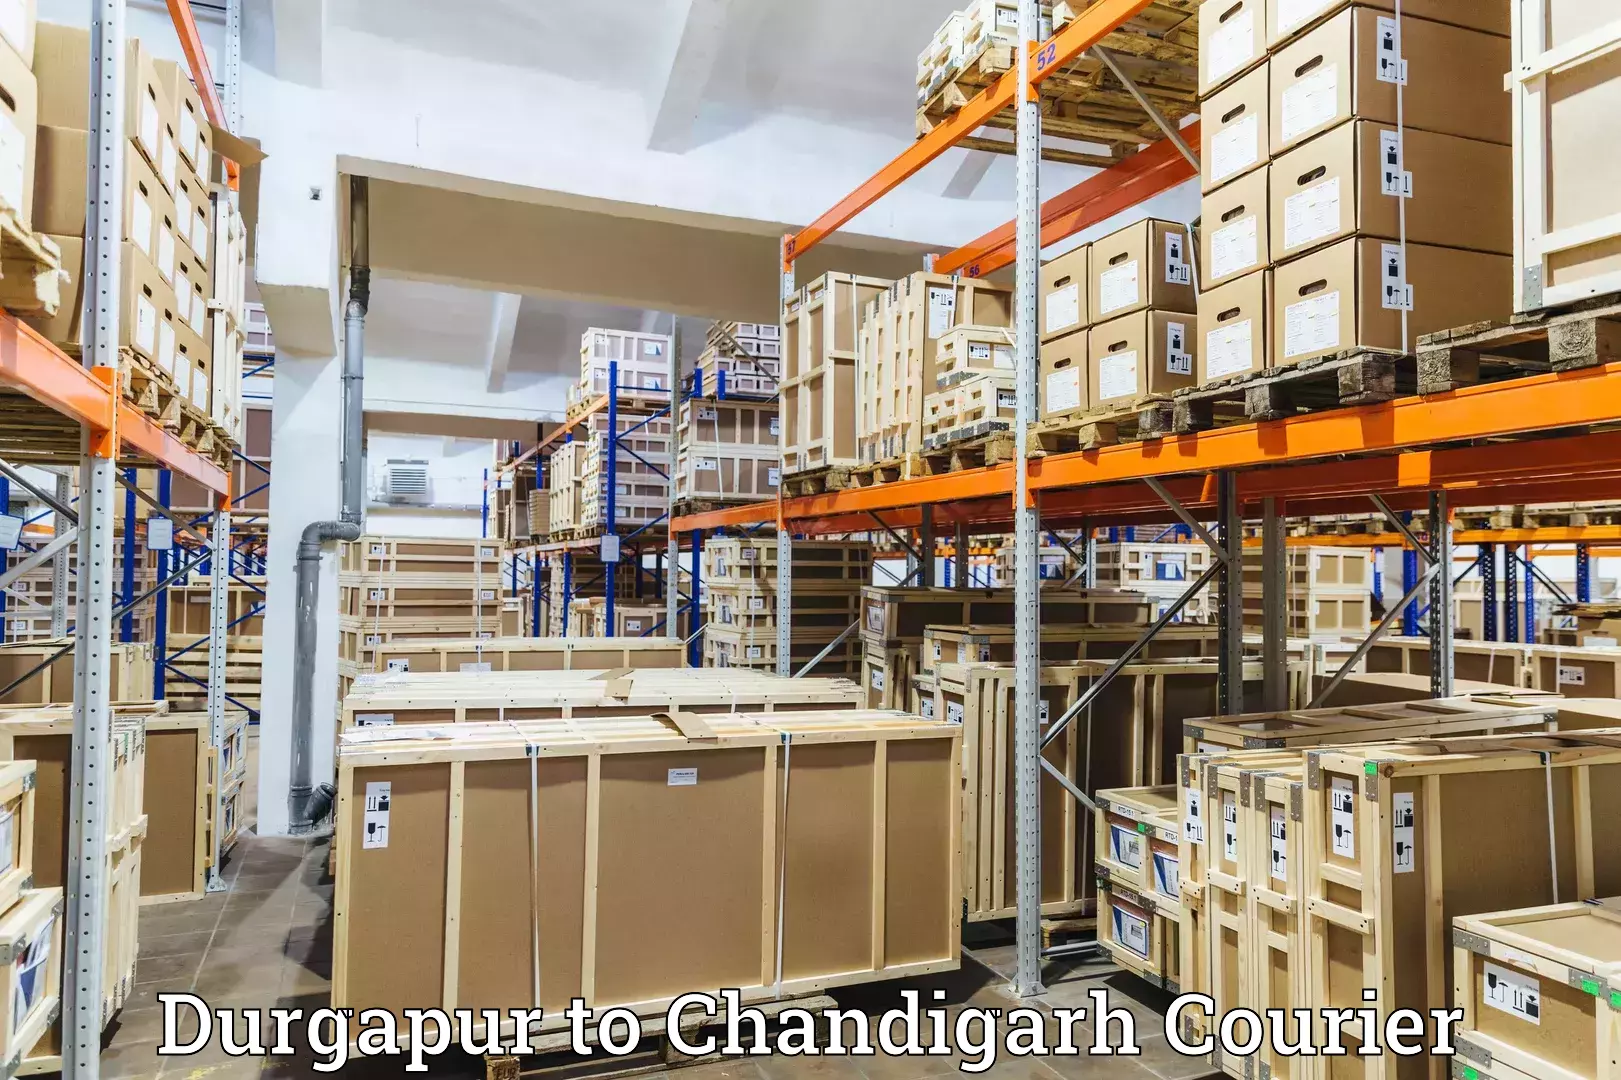 High-capacity parcel service Durgapur to Chandigarh